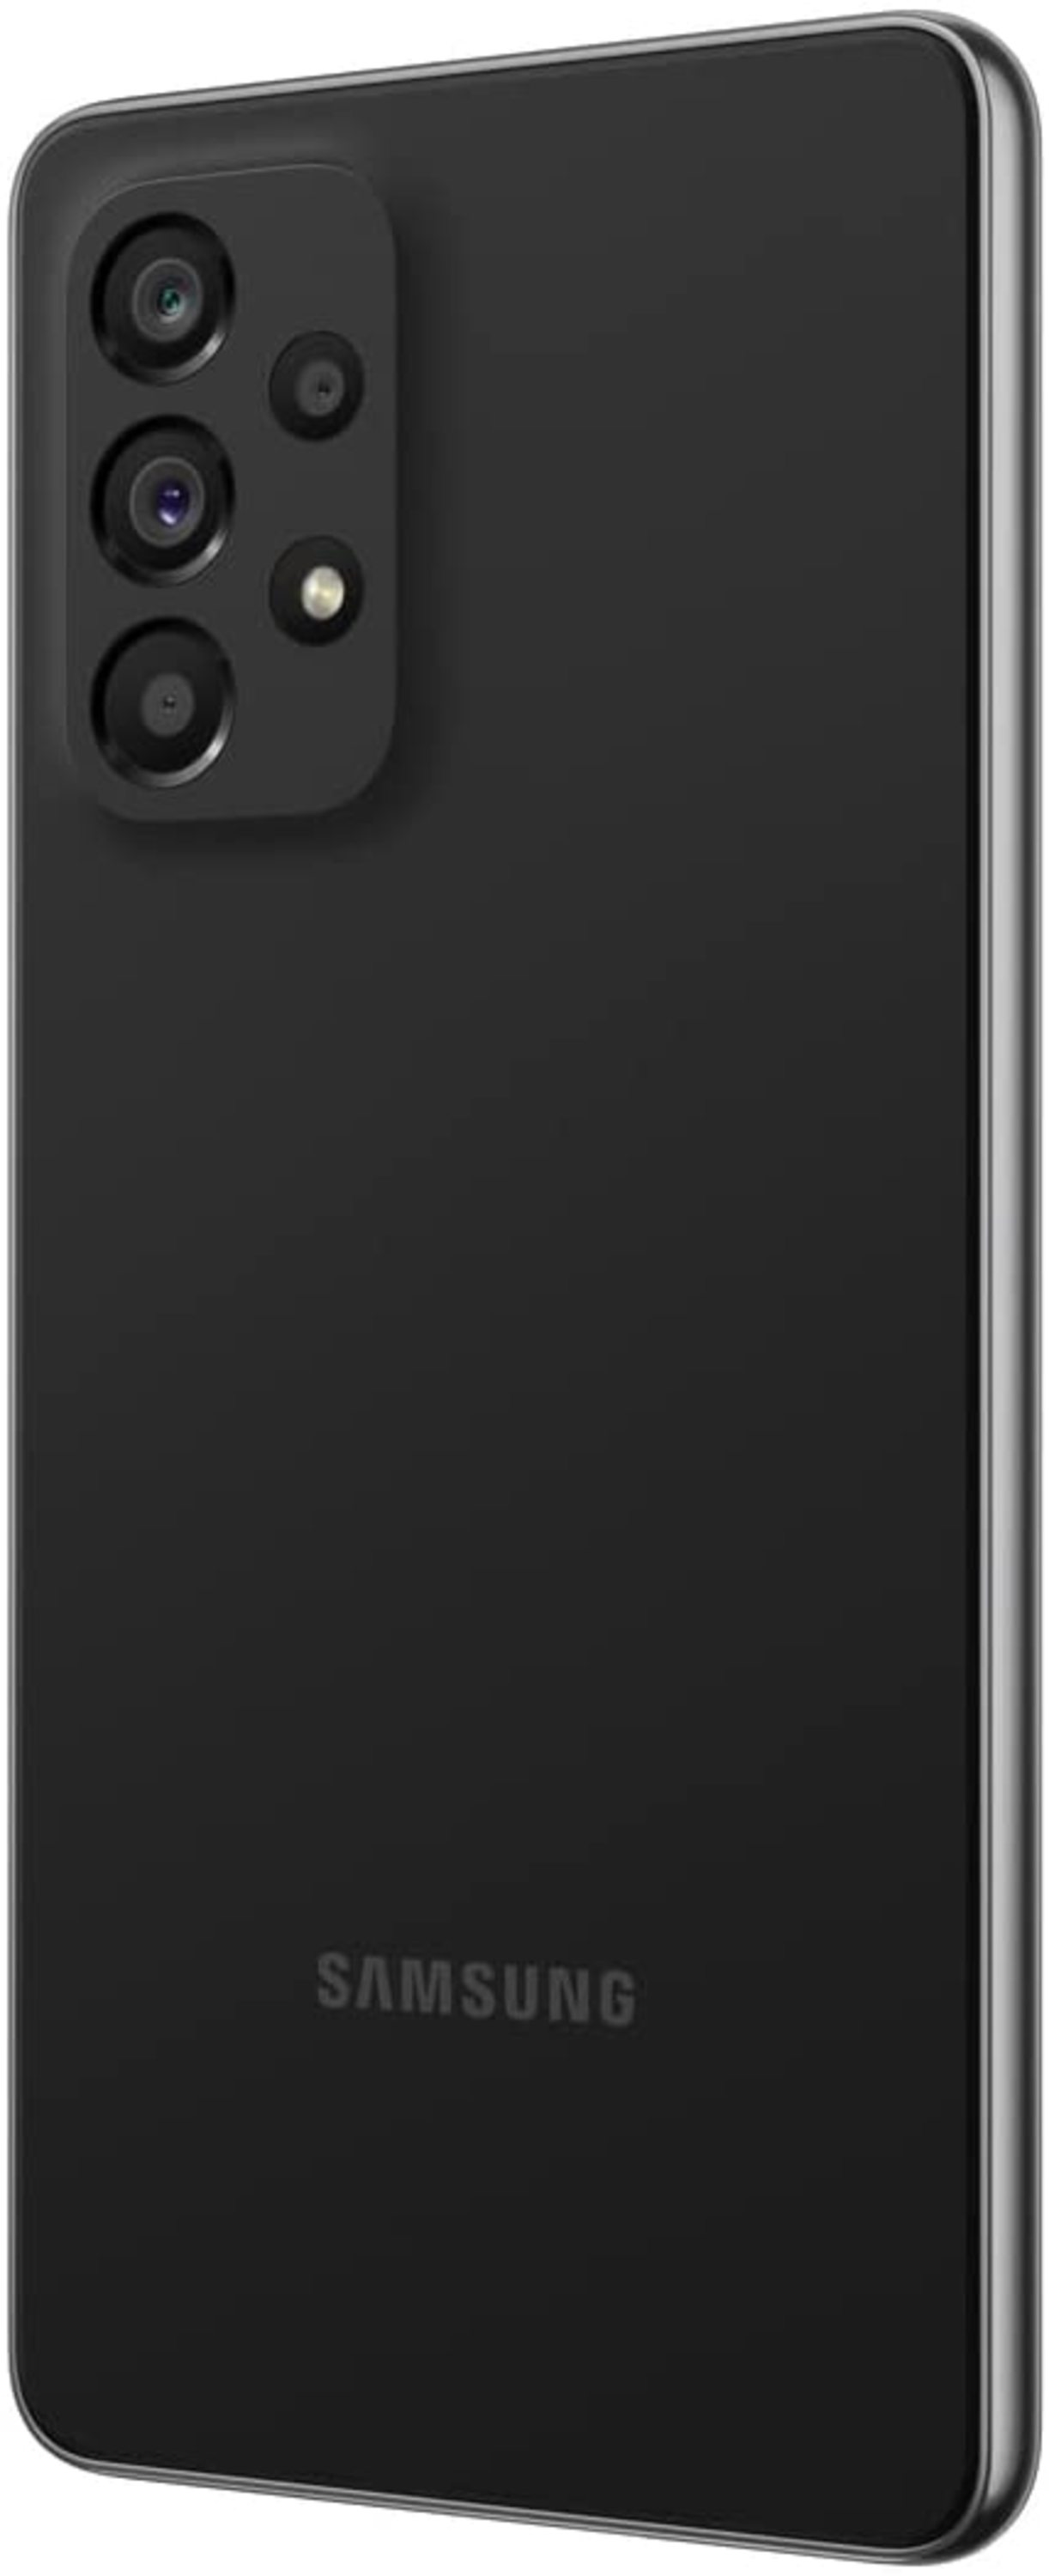 Samsung Galaxy A53 5G A536E 128GB Dual SIM GSM Unlocked Android Smartphone (Global, International Variant/US Compatible LTE) - Awesome Black - image 7 of 10